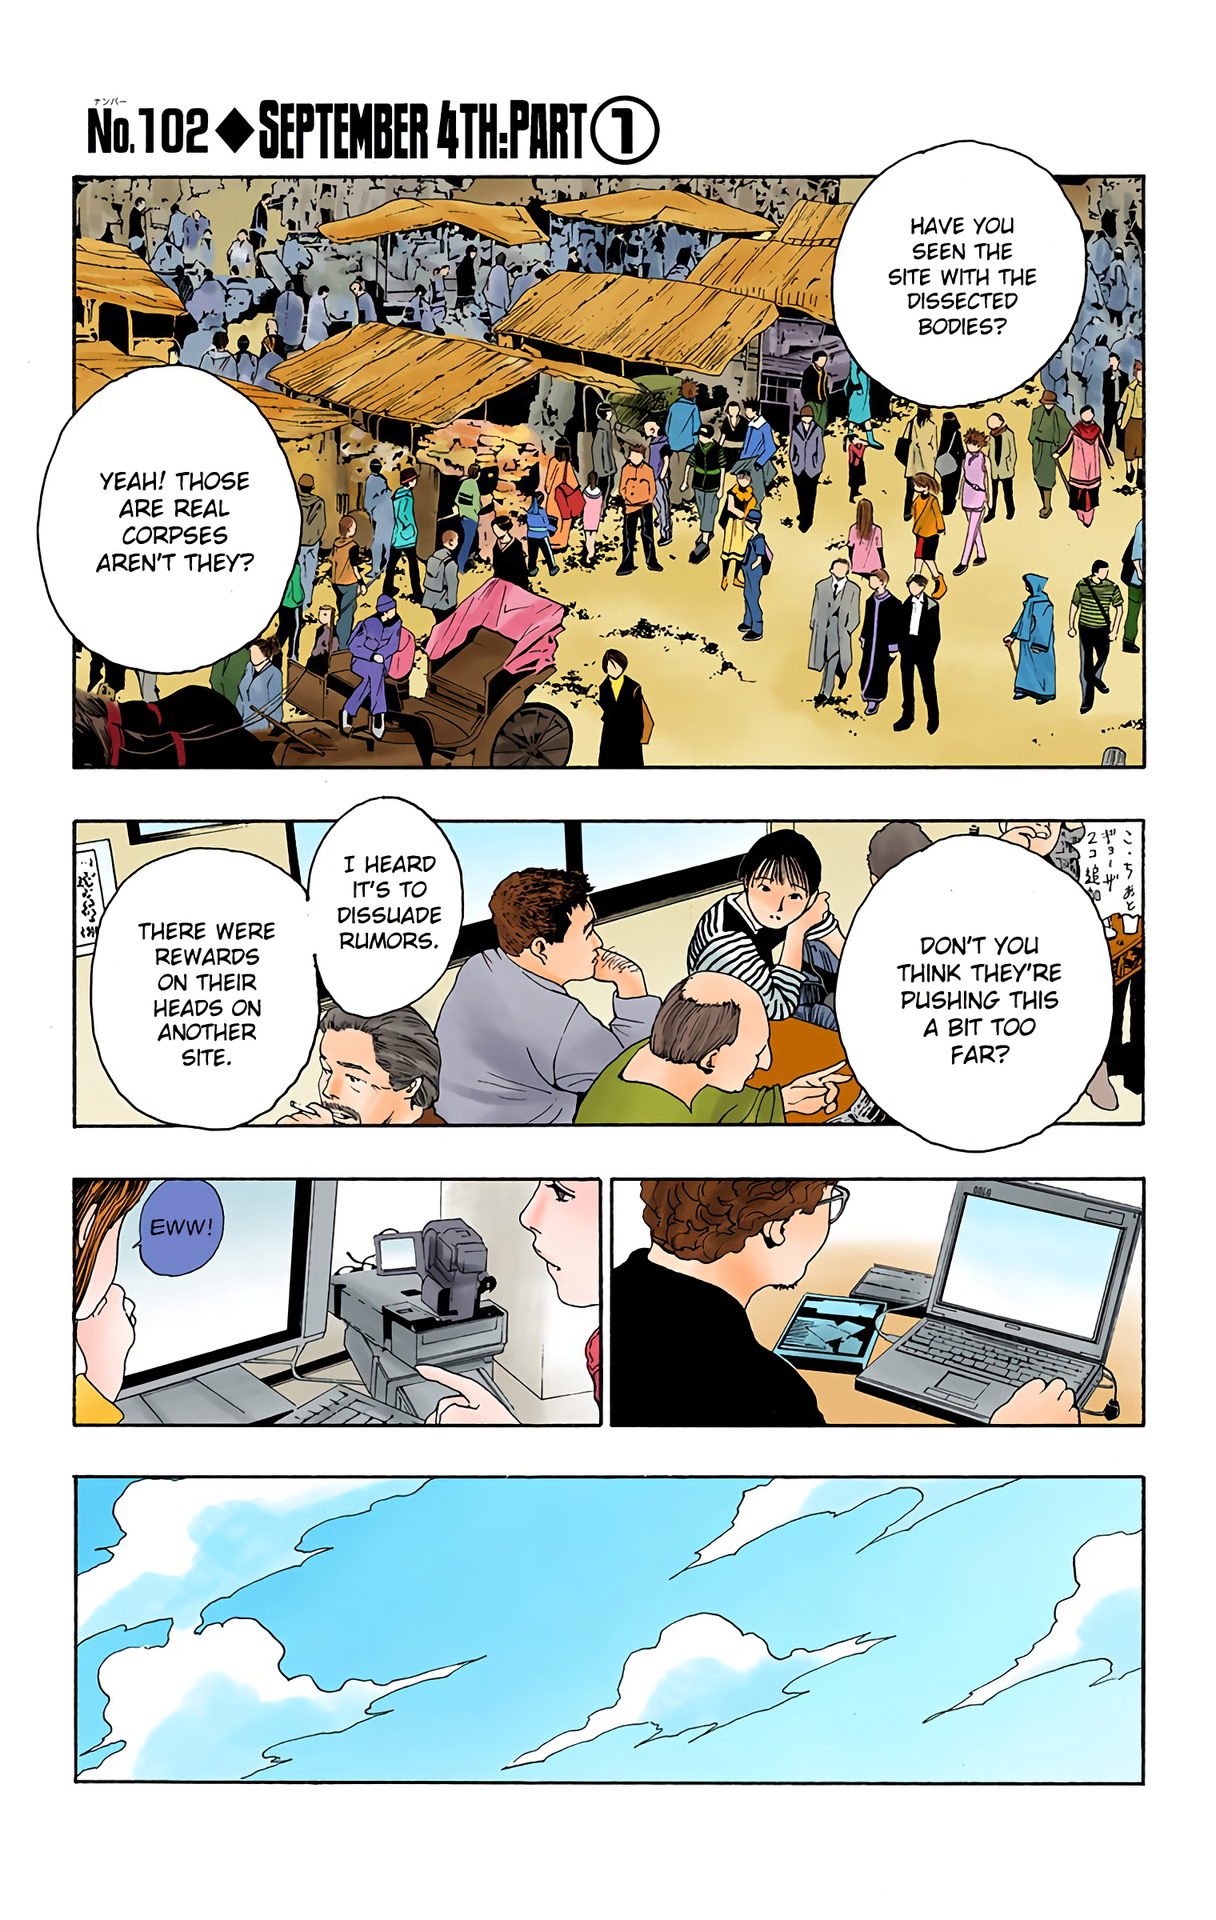 Hunter X Hunter Full Color Vol.11 Chapter 102: September 4Th: Part 1 - Picture 1